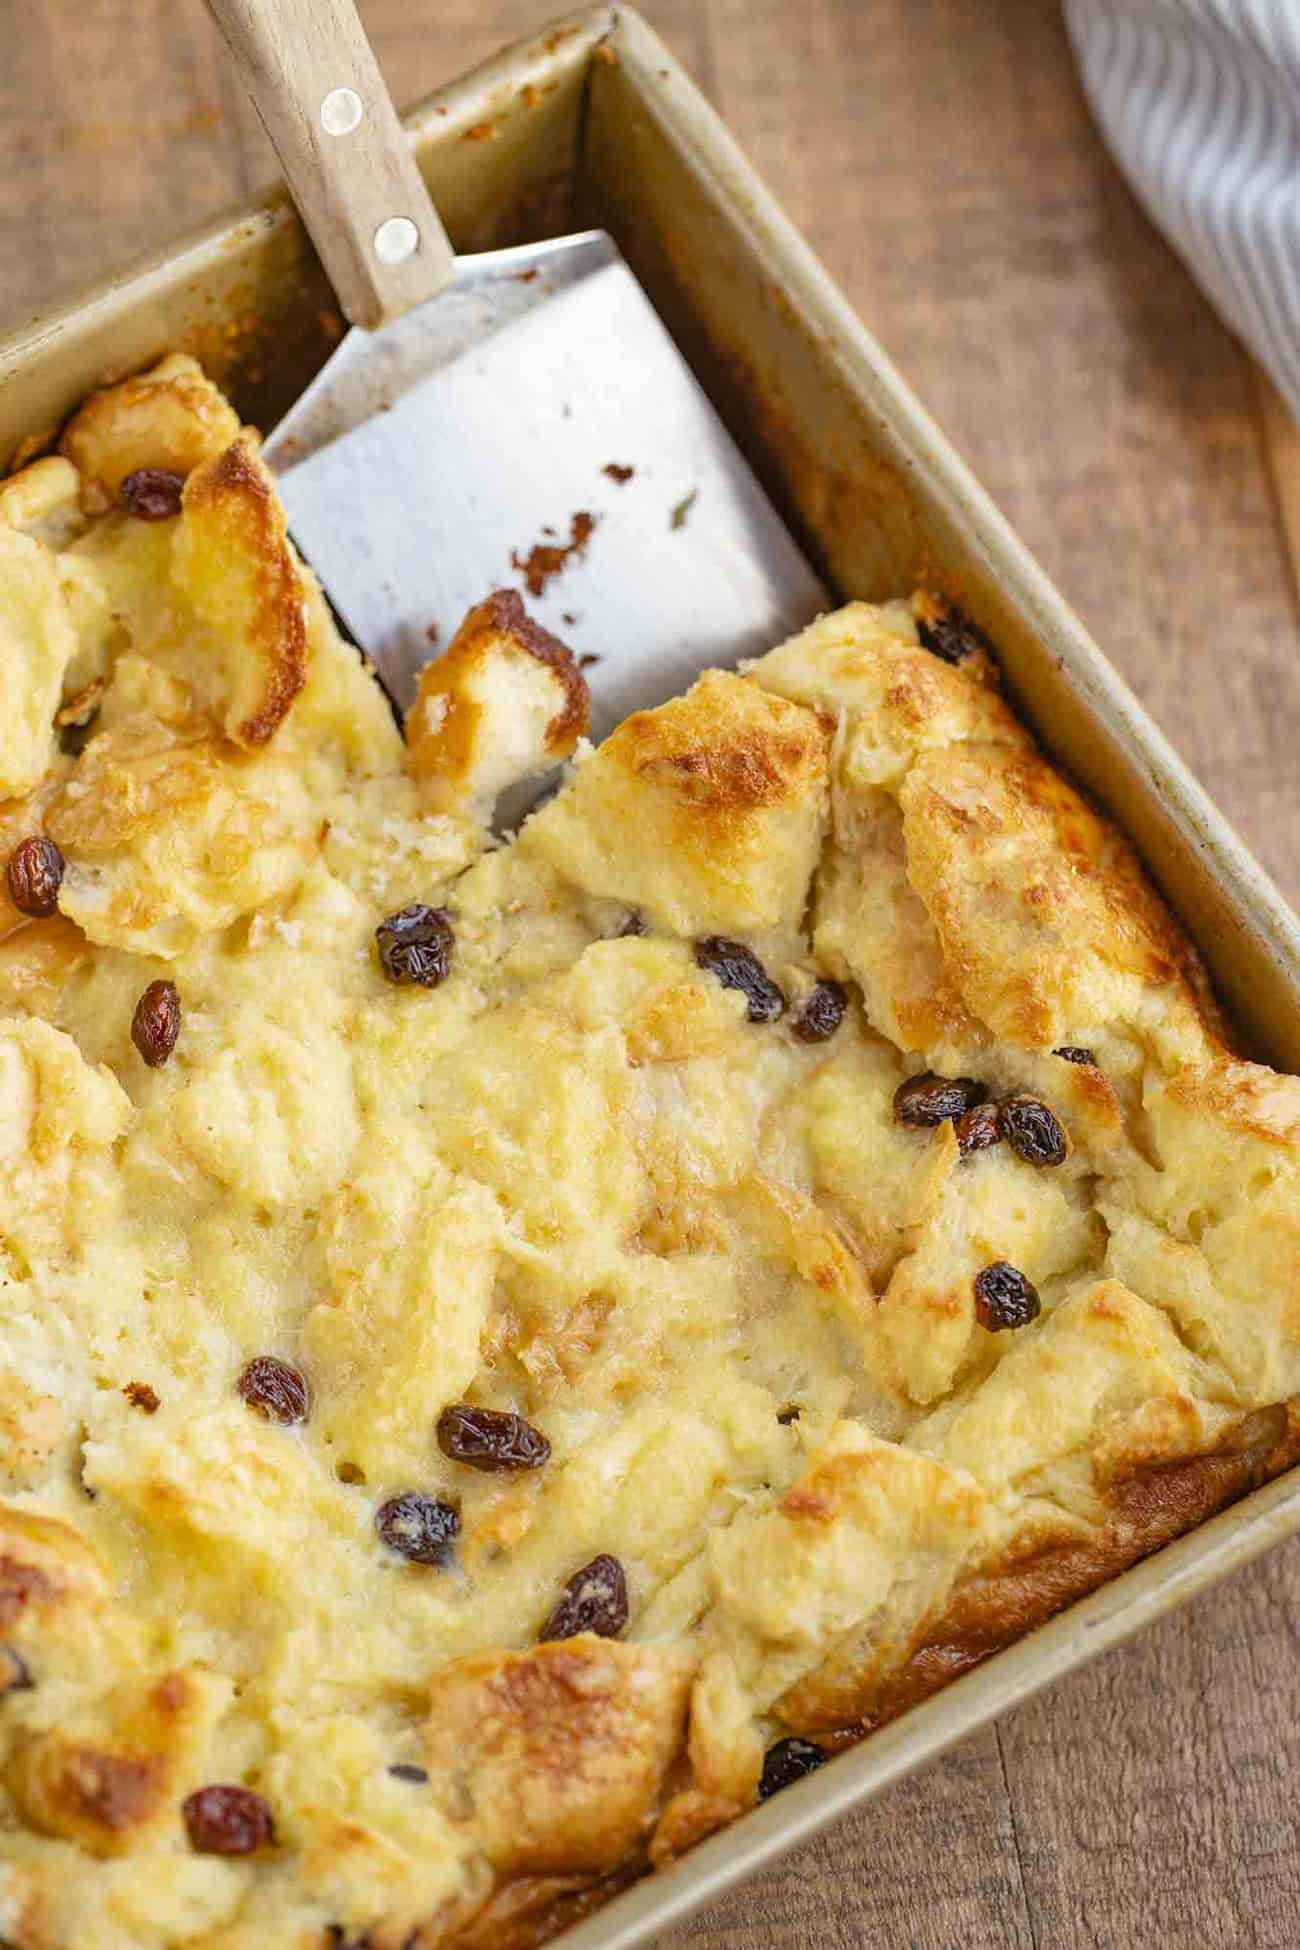 Baking pan with bread pudding